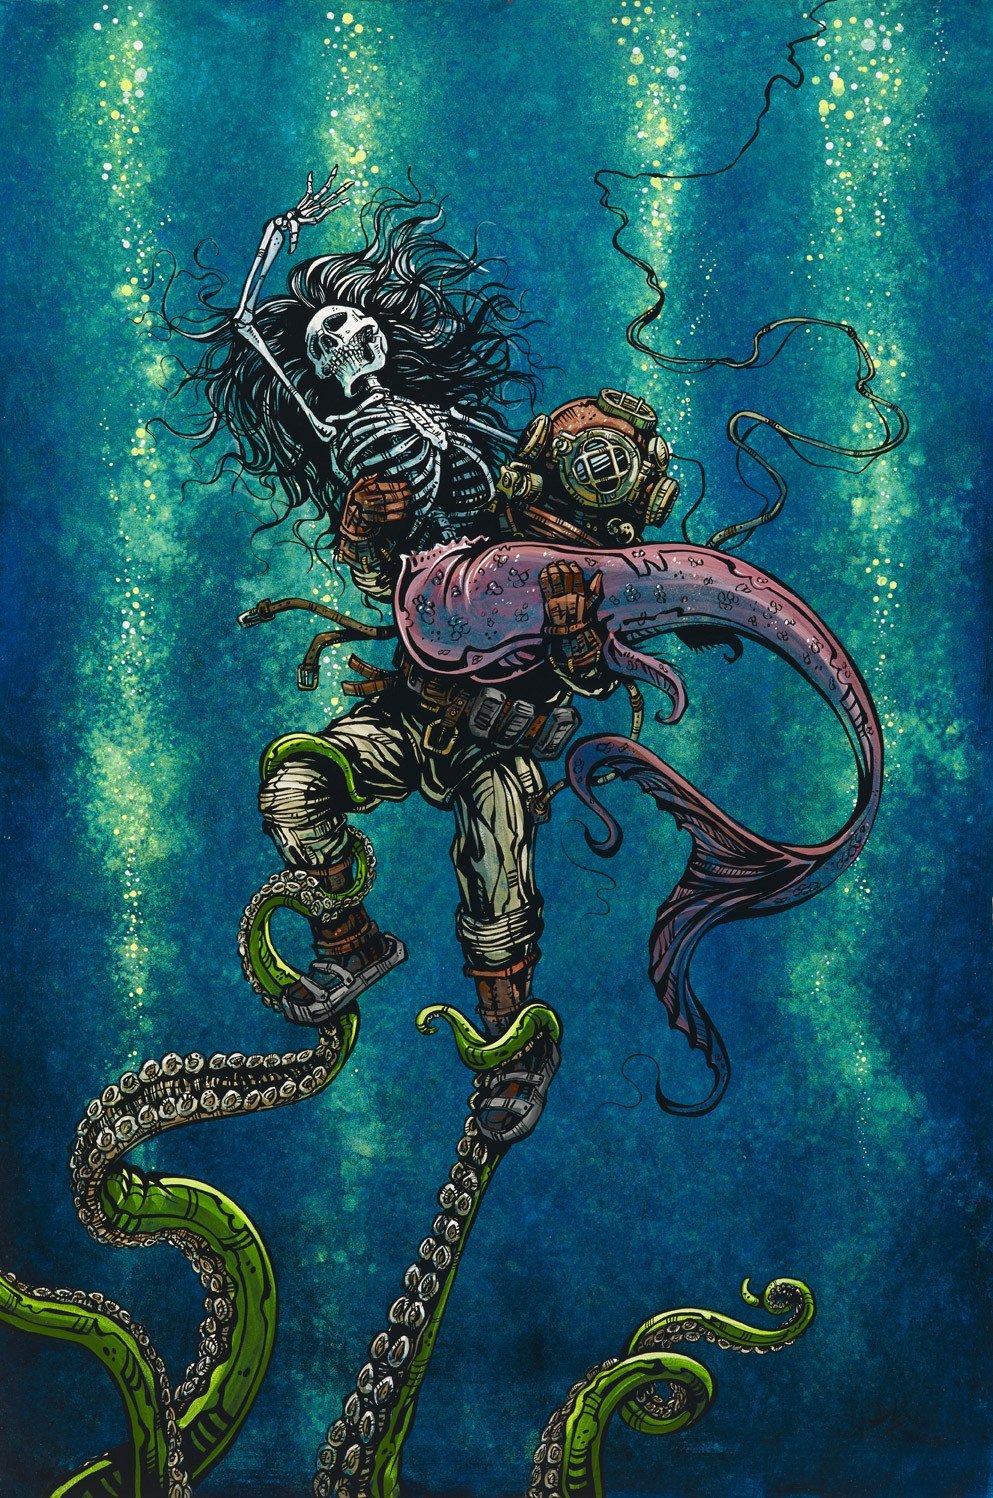 Catch or Release by Day of the Dead Artist David Lozeau